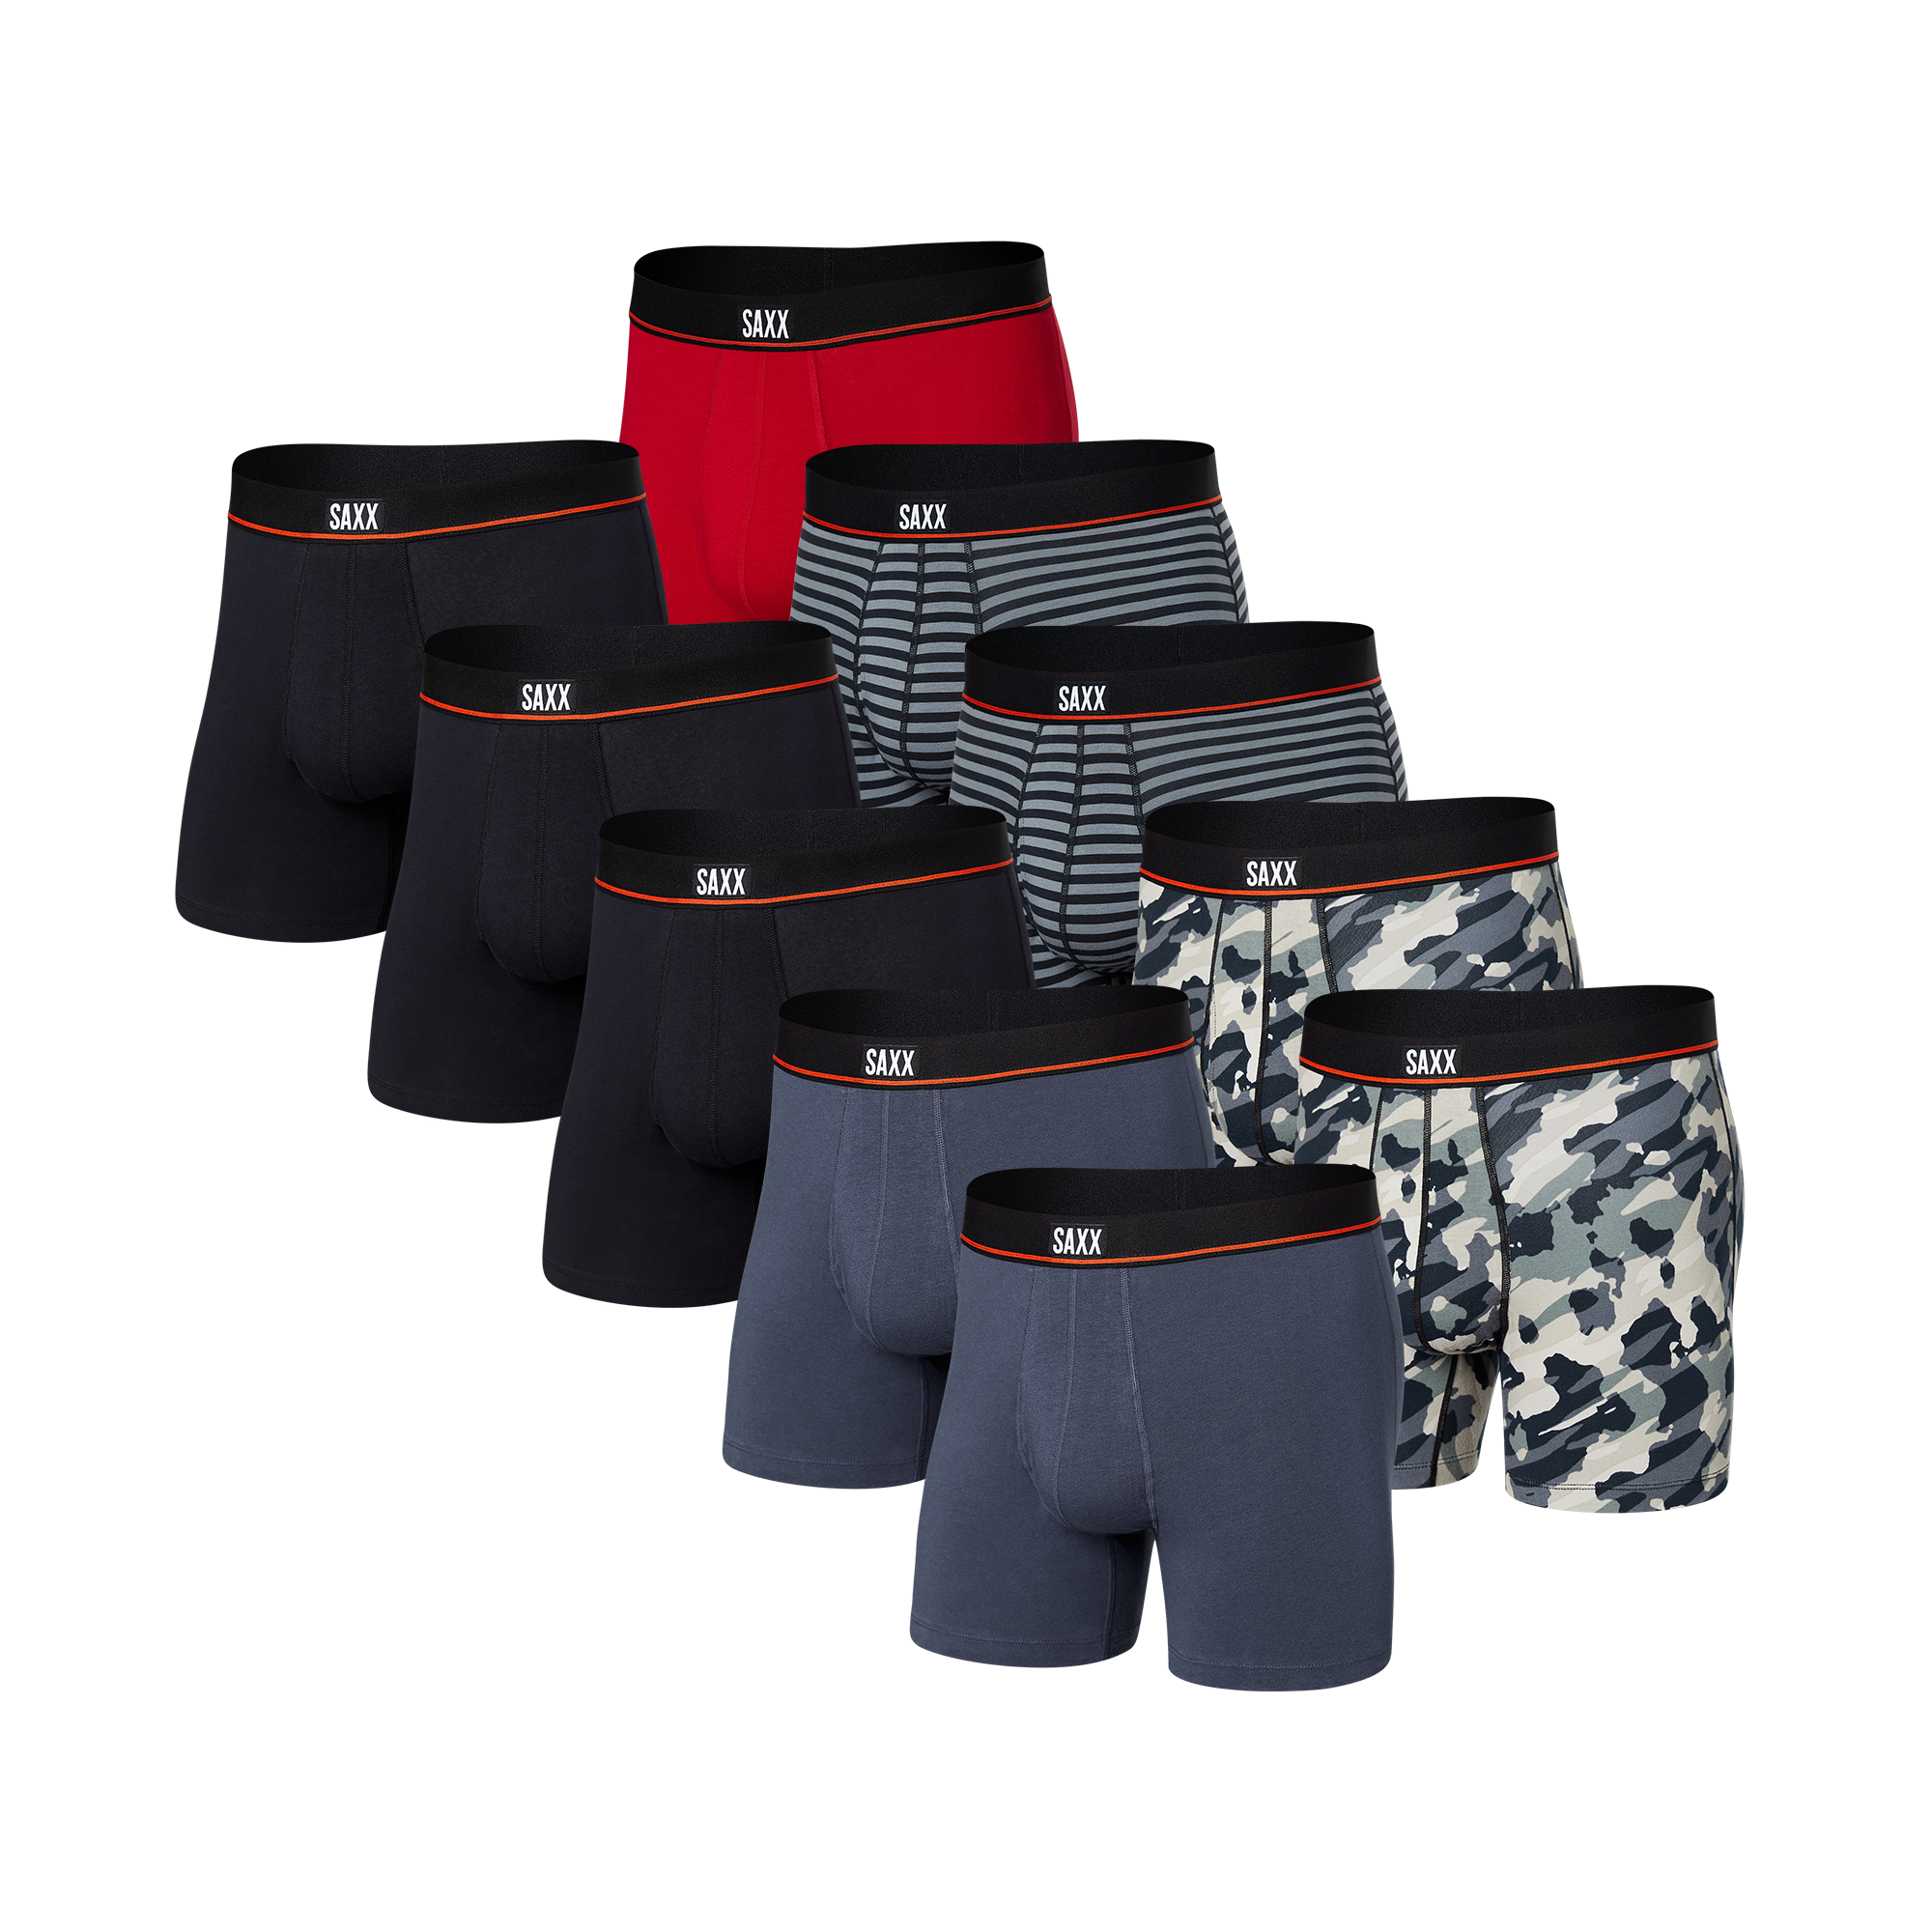 Non-Stop Stretch Cotton Boxer Brief 10-Pack in Assorted Prints